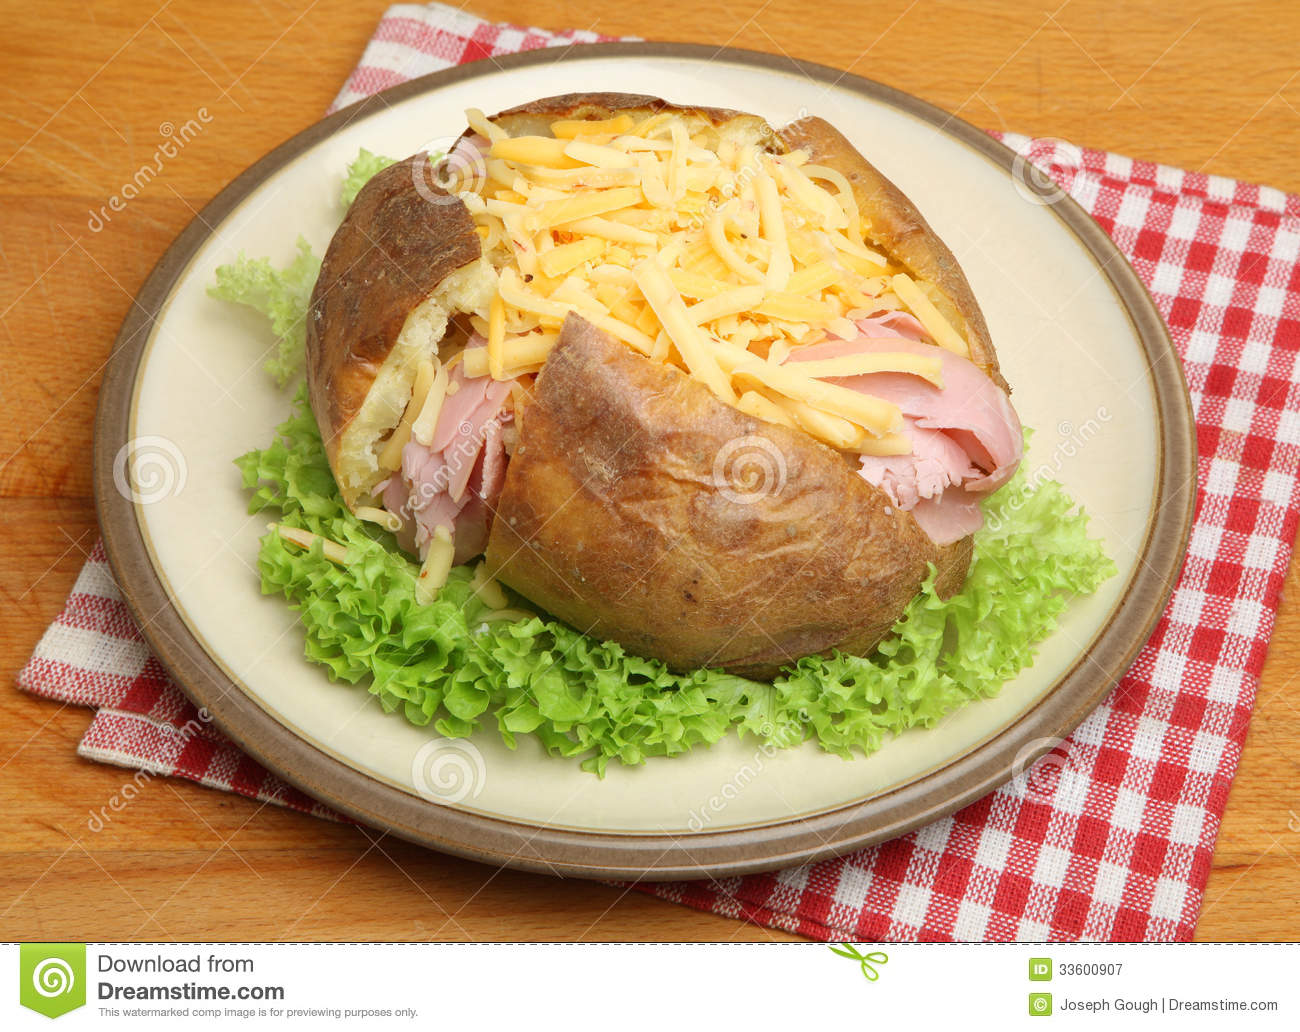 Baked Potato With Ham   Cheese Royalty Free Stock Photography   Image    